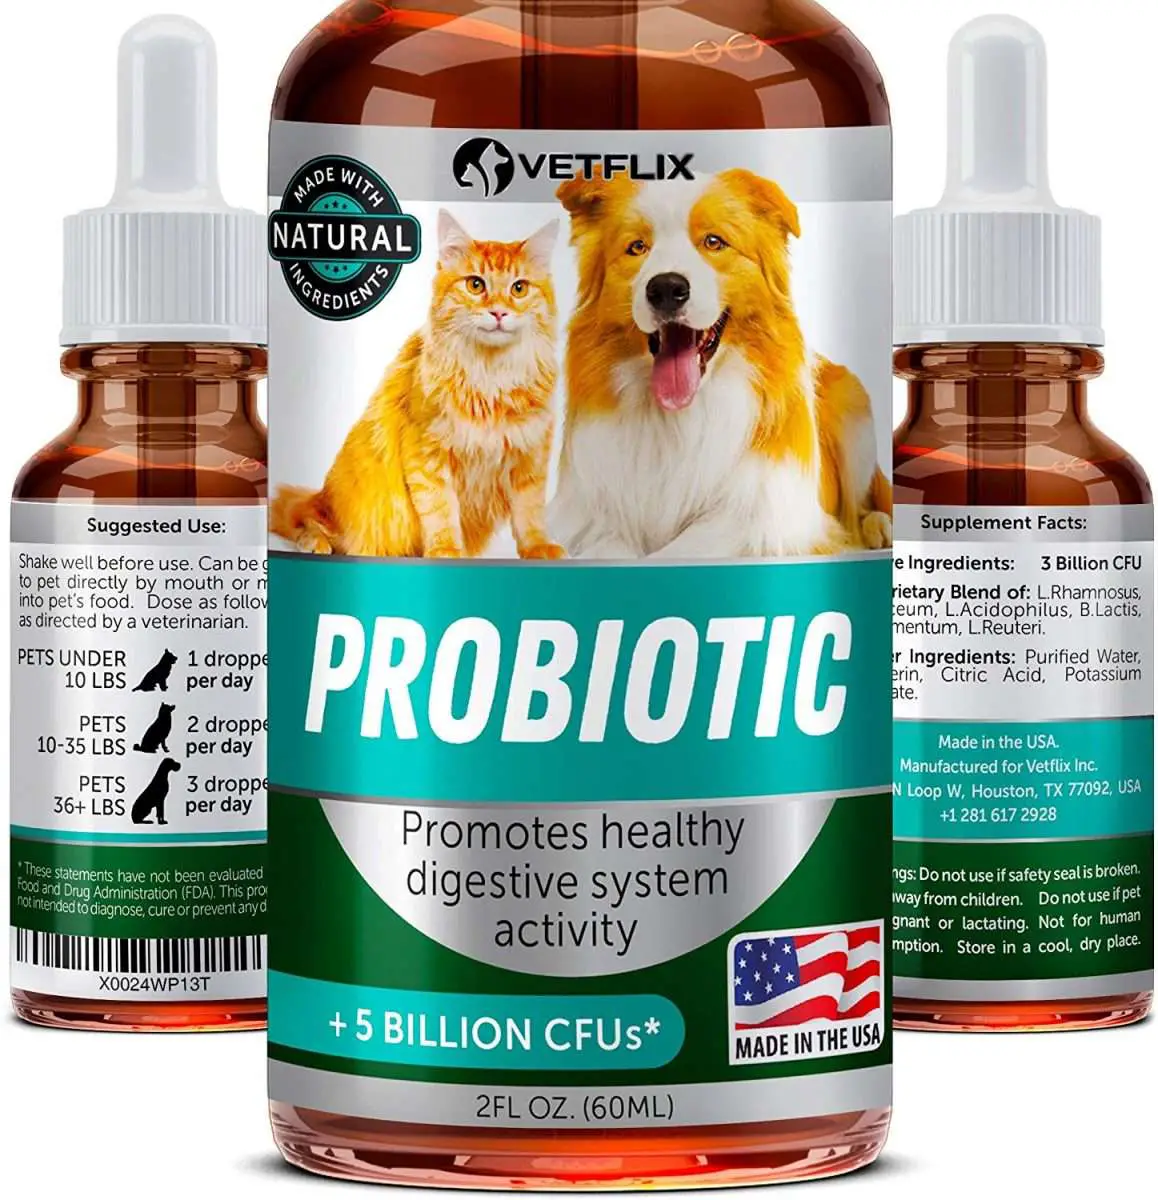 The 5 Best Probiotics for Cats of 2020 + Why They Are Beneficial